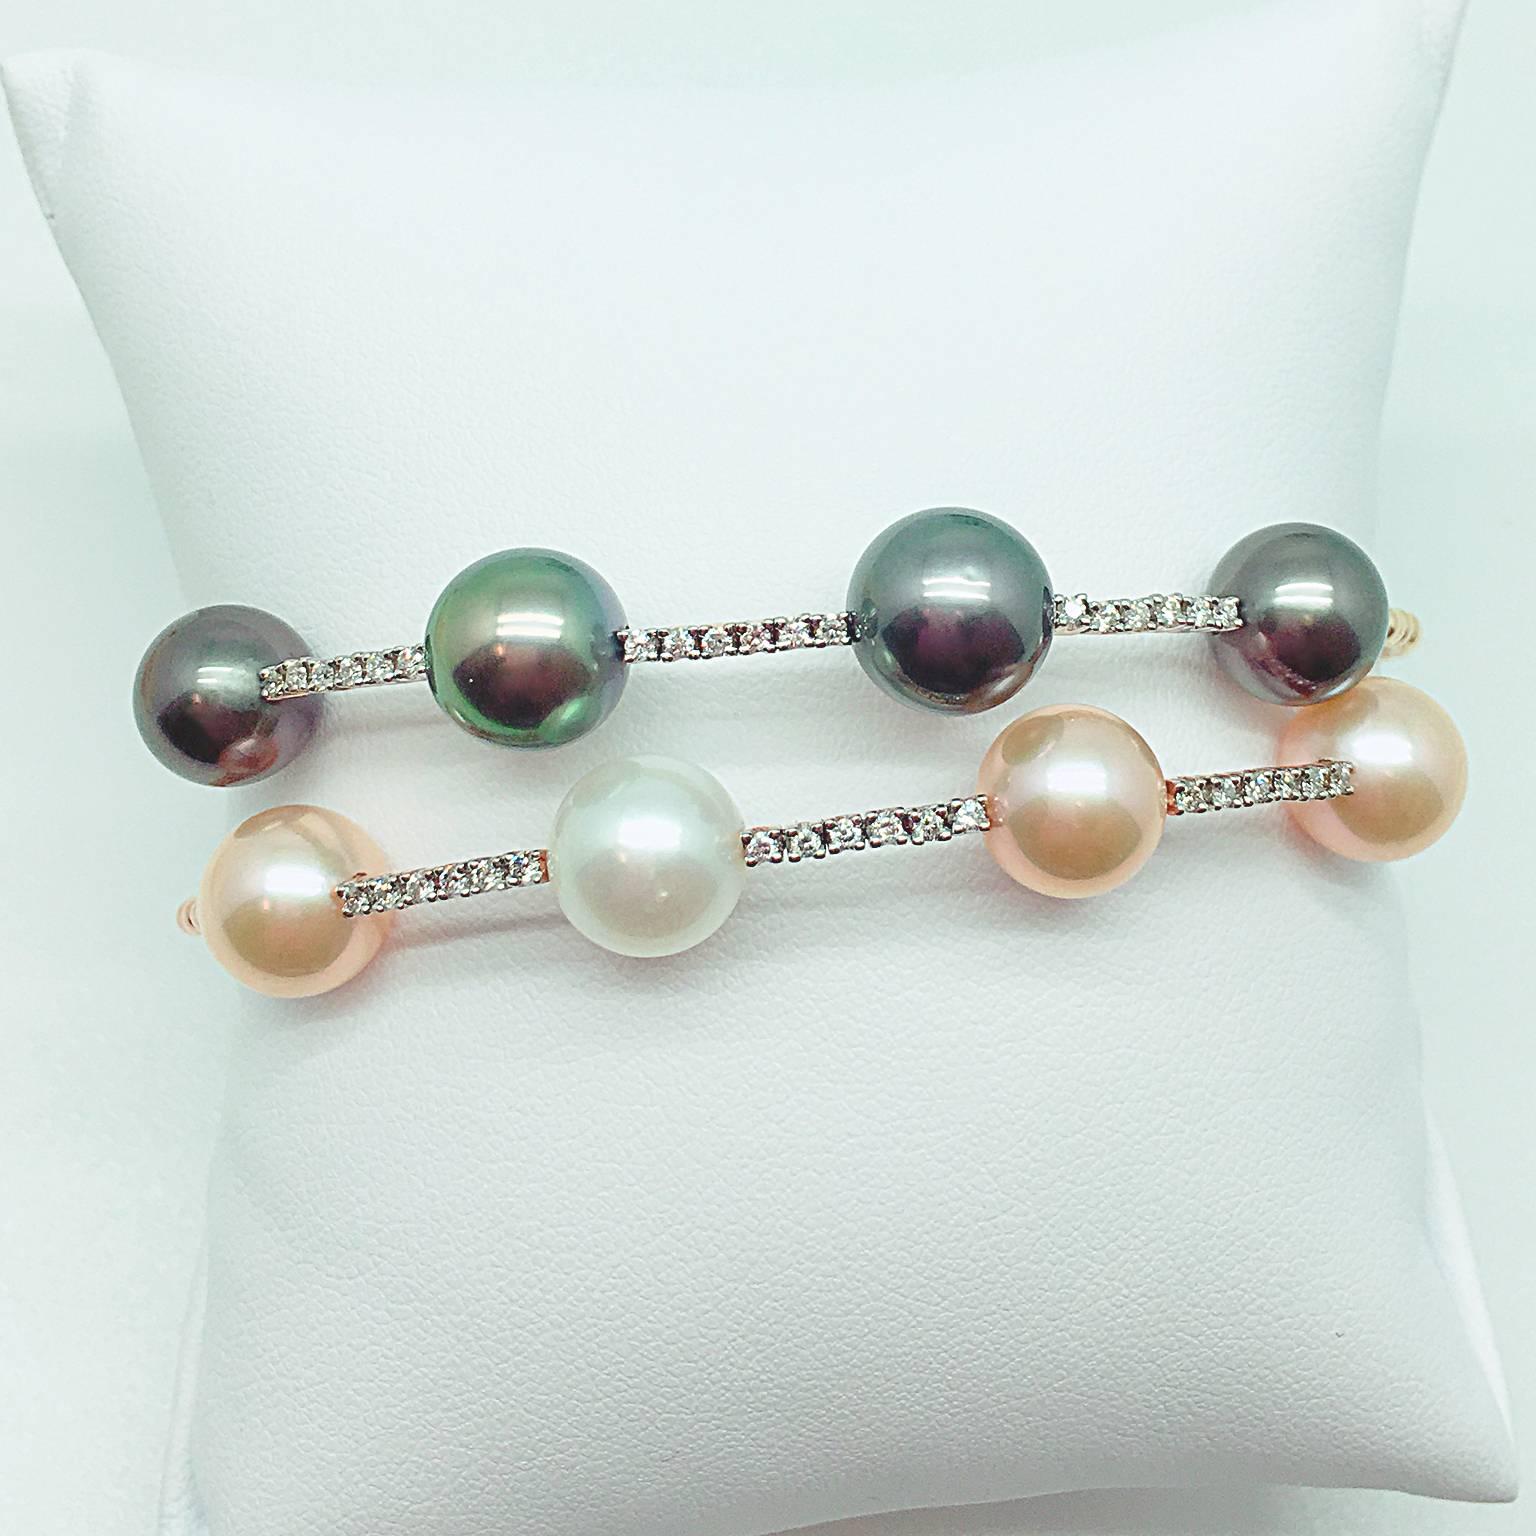 Tahitian Pearls: 9.04, 9.55, 9.42 and 9.00mm
White Diamond: 0.18 carat
Set in 18K Yellow Gold.

Matching bangle with white southsea and freshwater pearls also available.